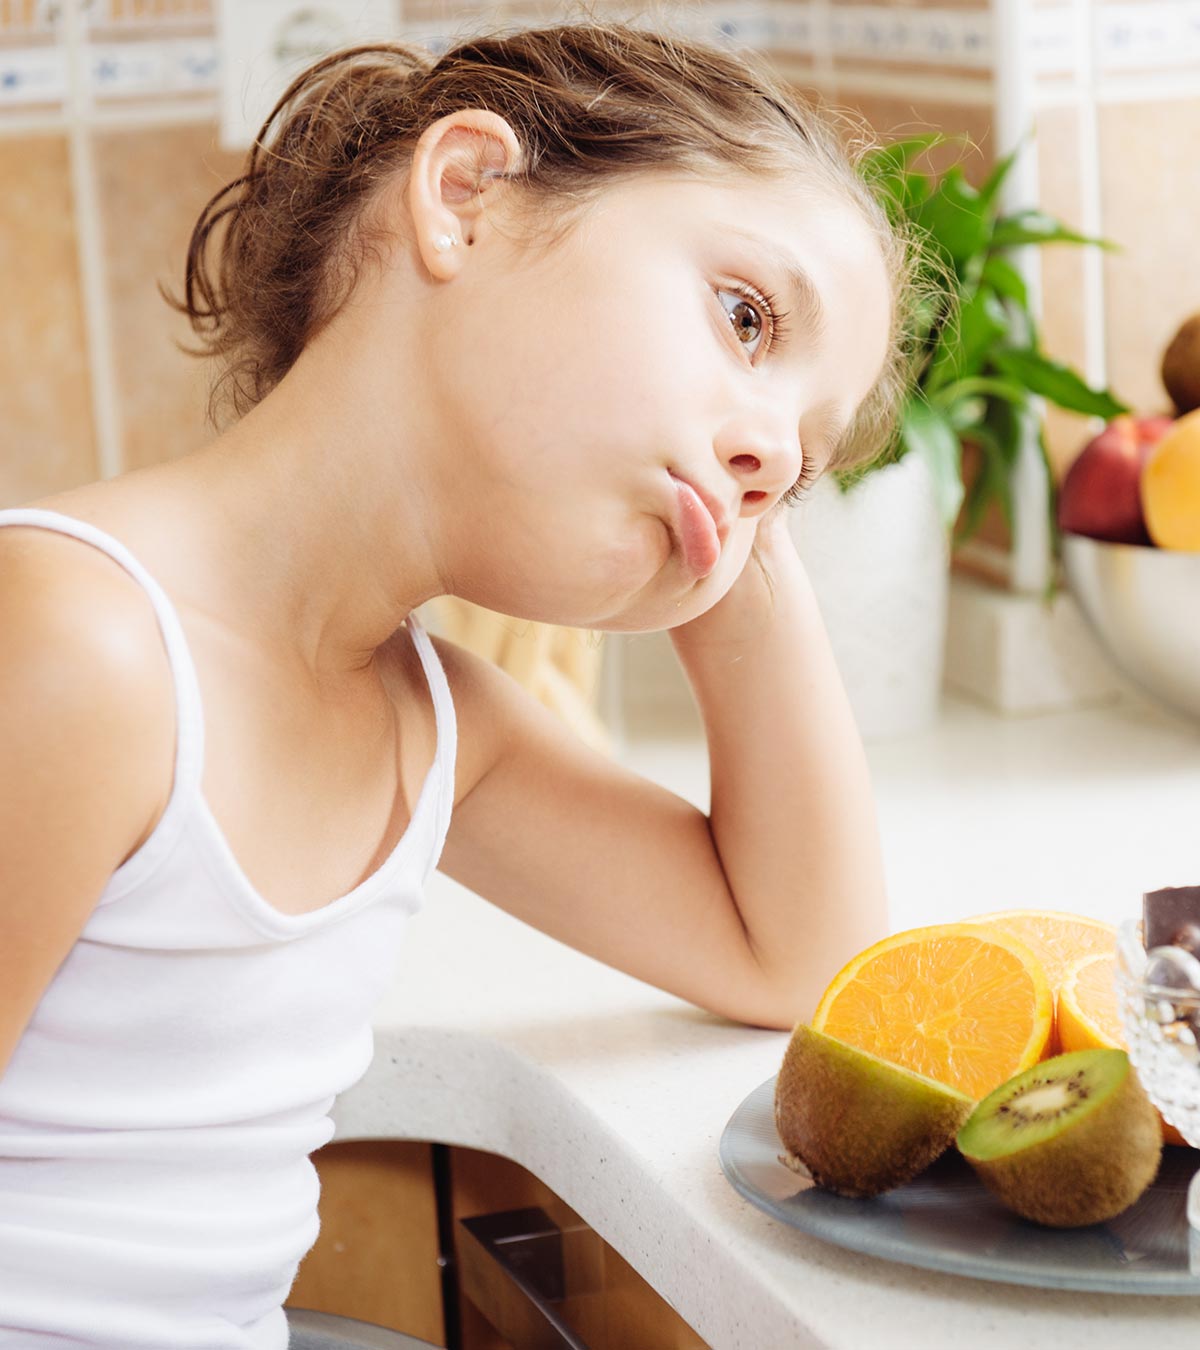 Loss Of Appetite In Children: 9 Causes And 7 Prevention Tips